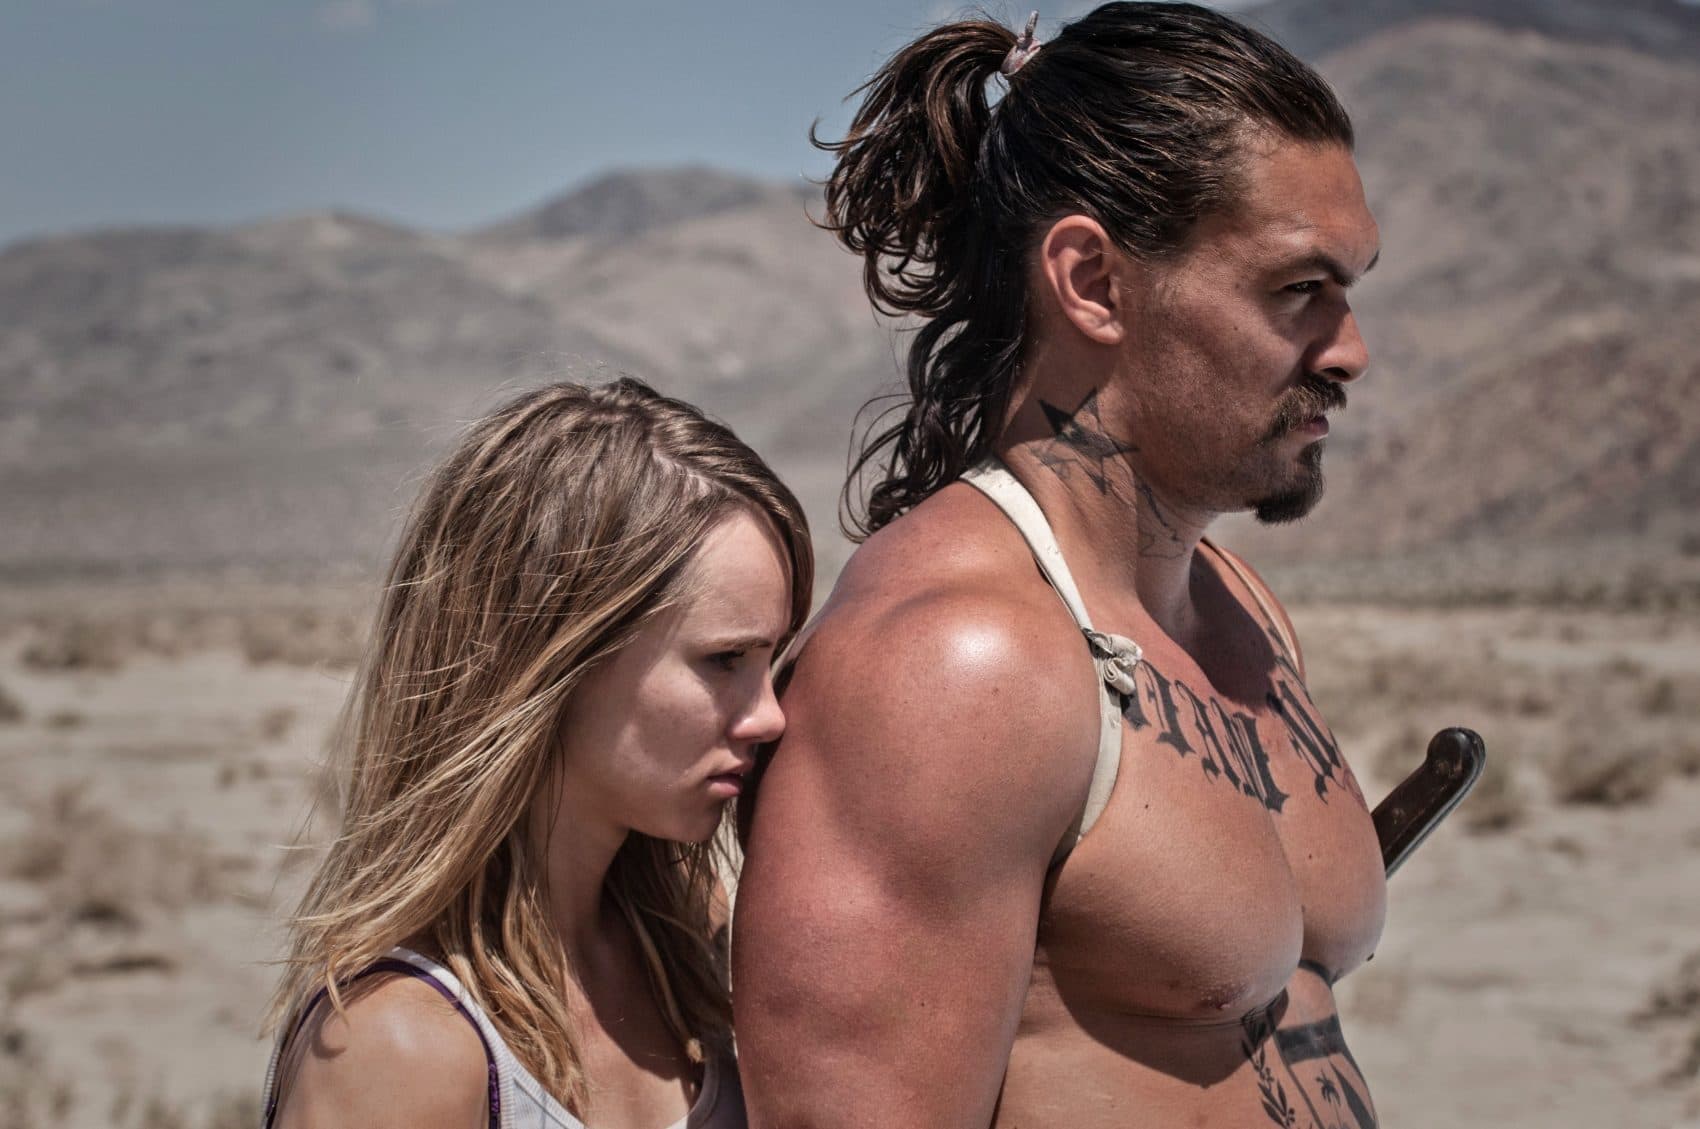 Arlen, played by Suki Waterhouse, and Miami Man, played by Jason Momoa, brace for a fight in &quot;The Bad Batch.&quot; (Courtesy NEON)